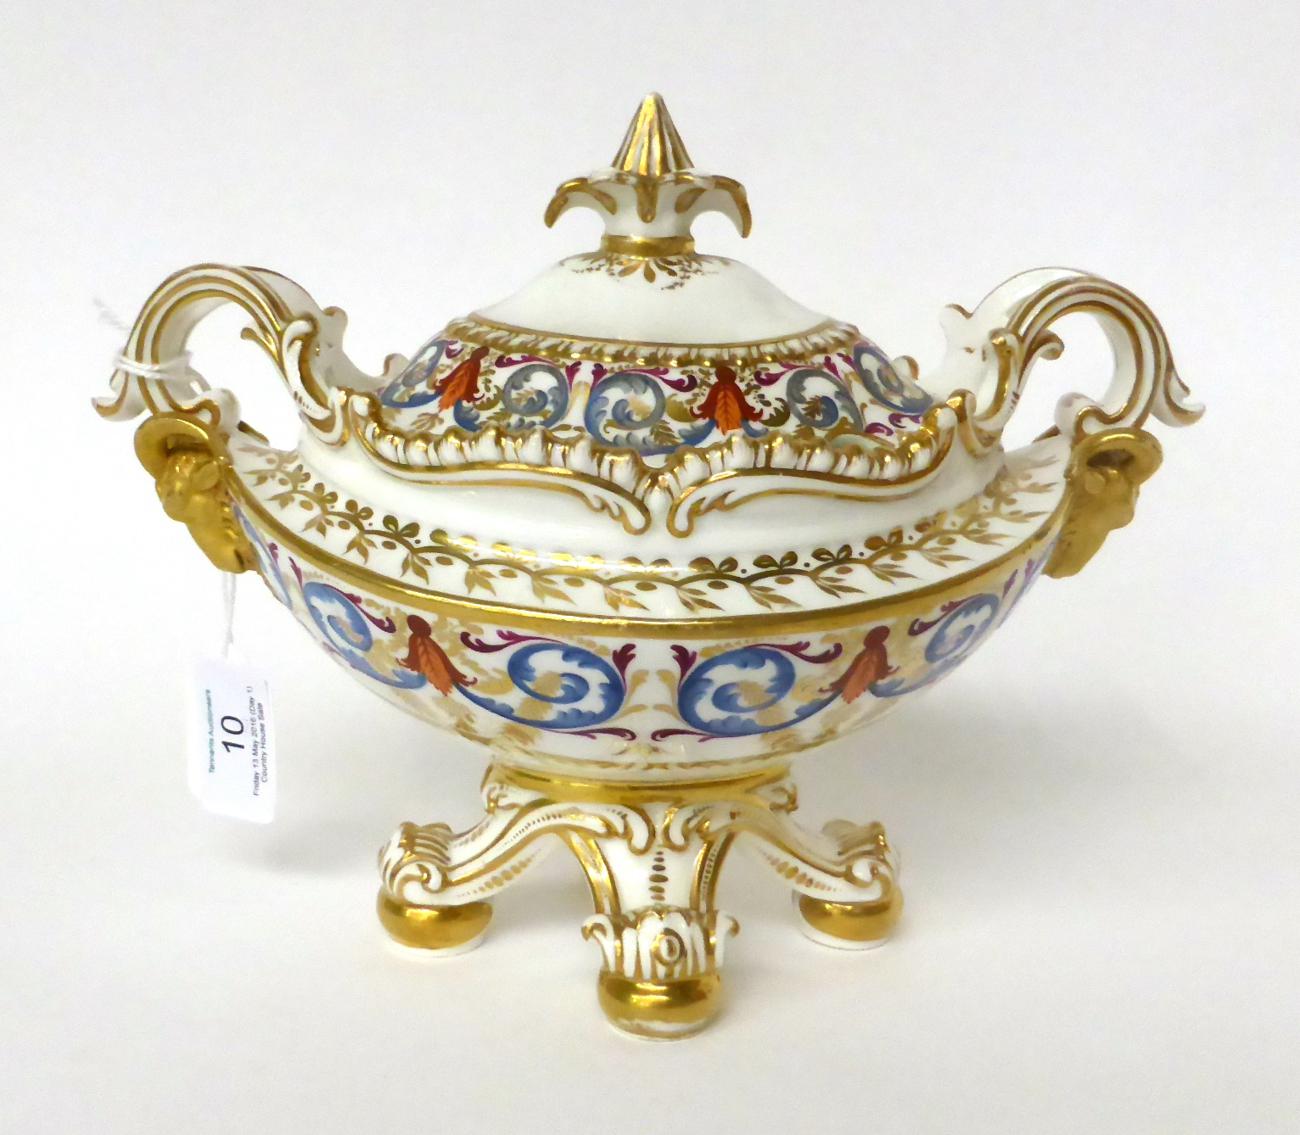 * An early 19th century English porcelain boat shaped saucer tureen and cover with classical